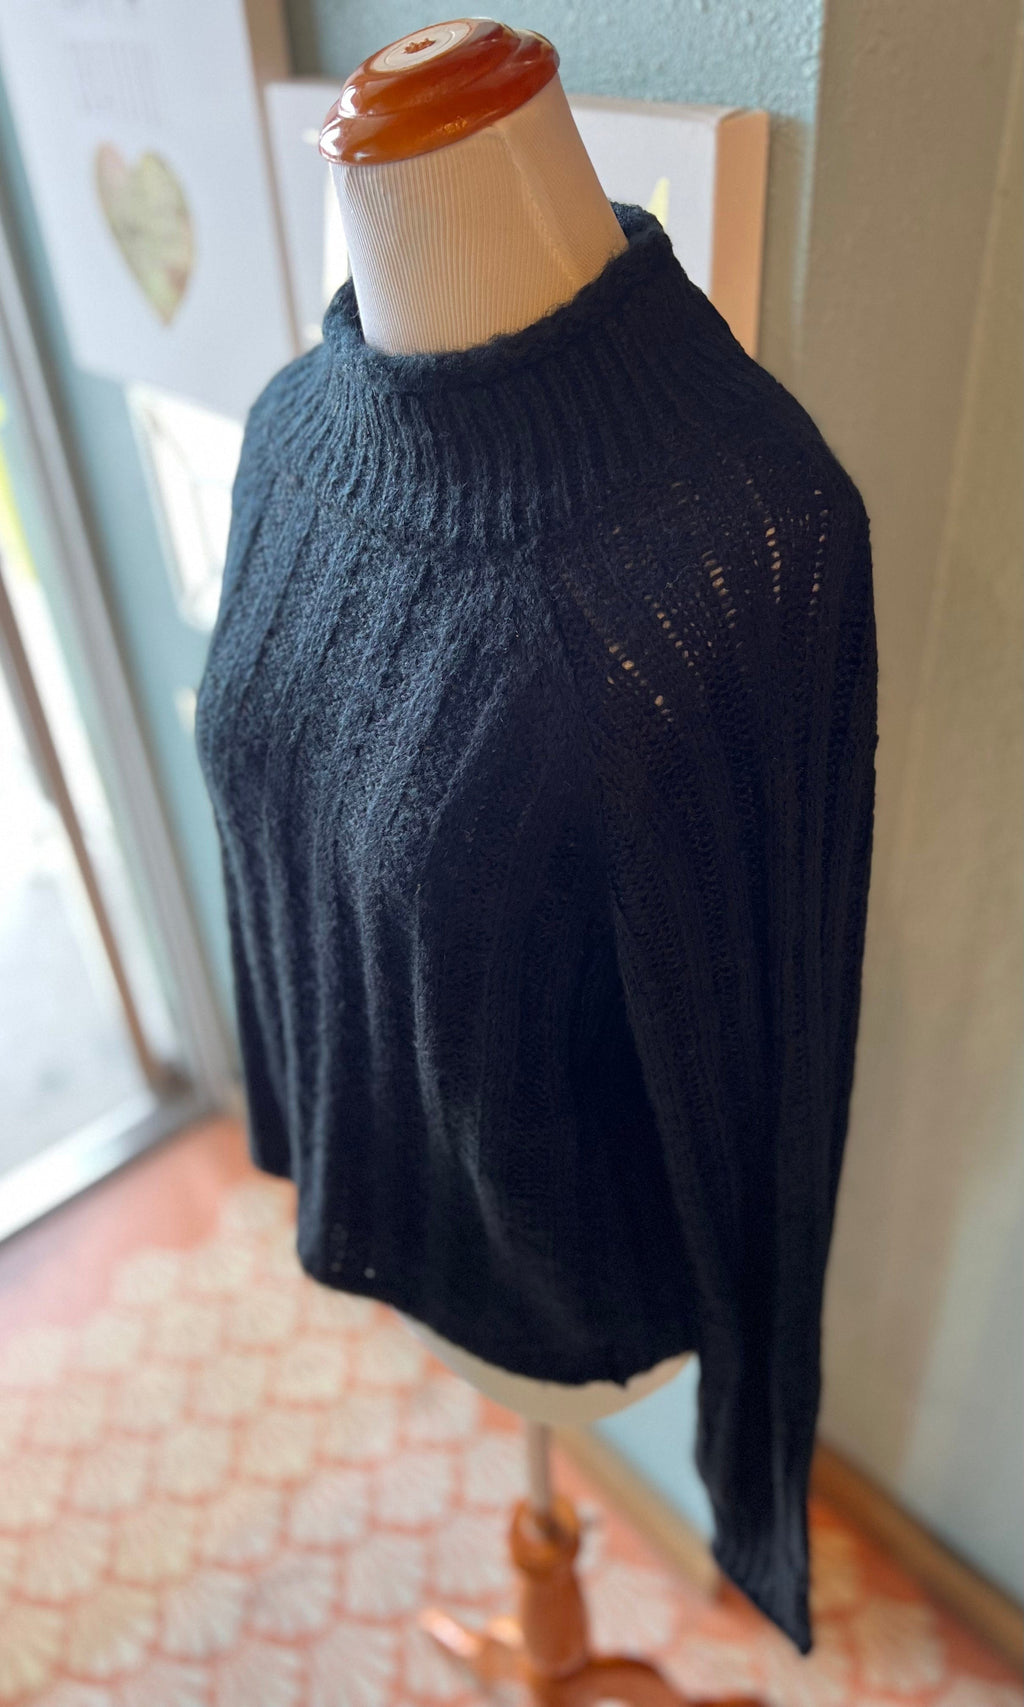 New In Black Knitted Sweater